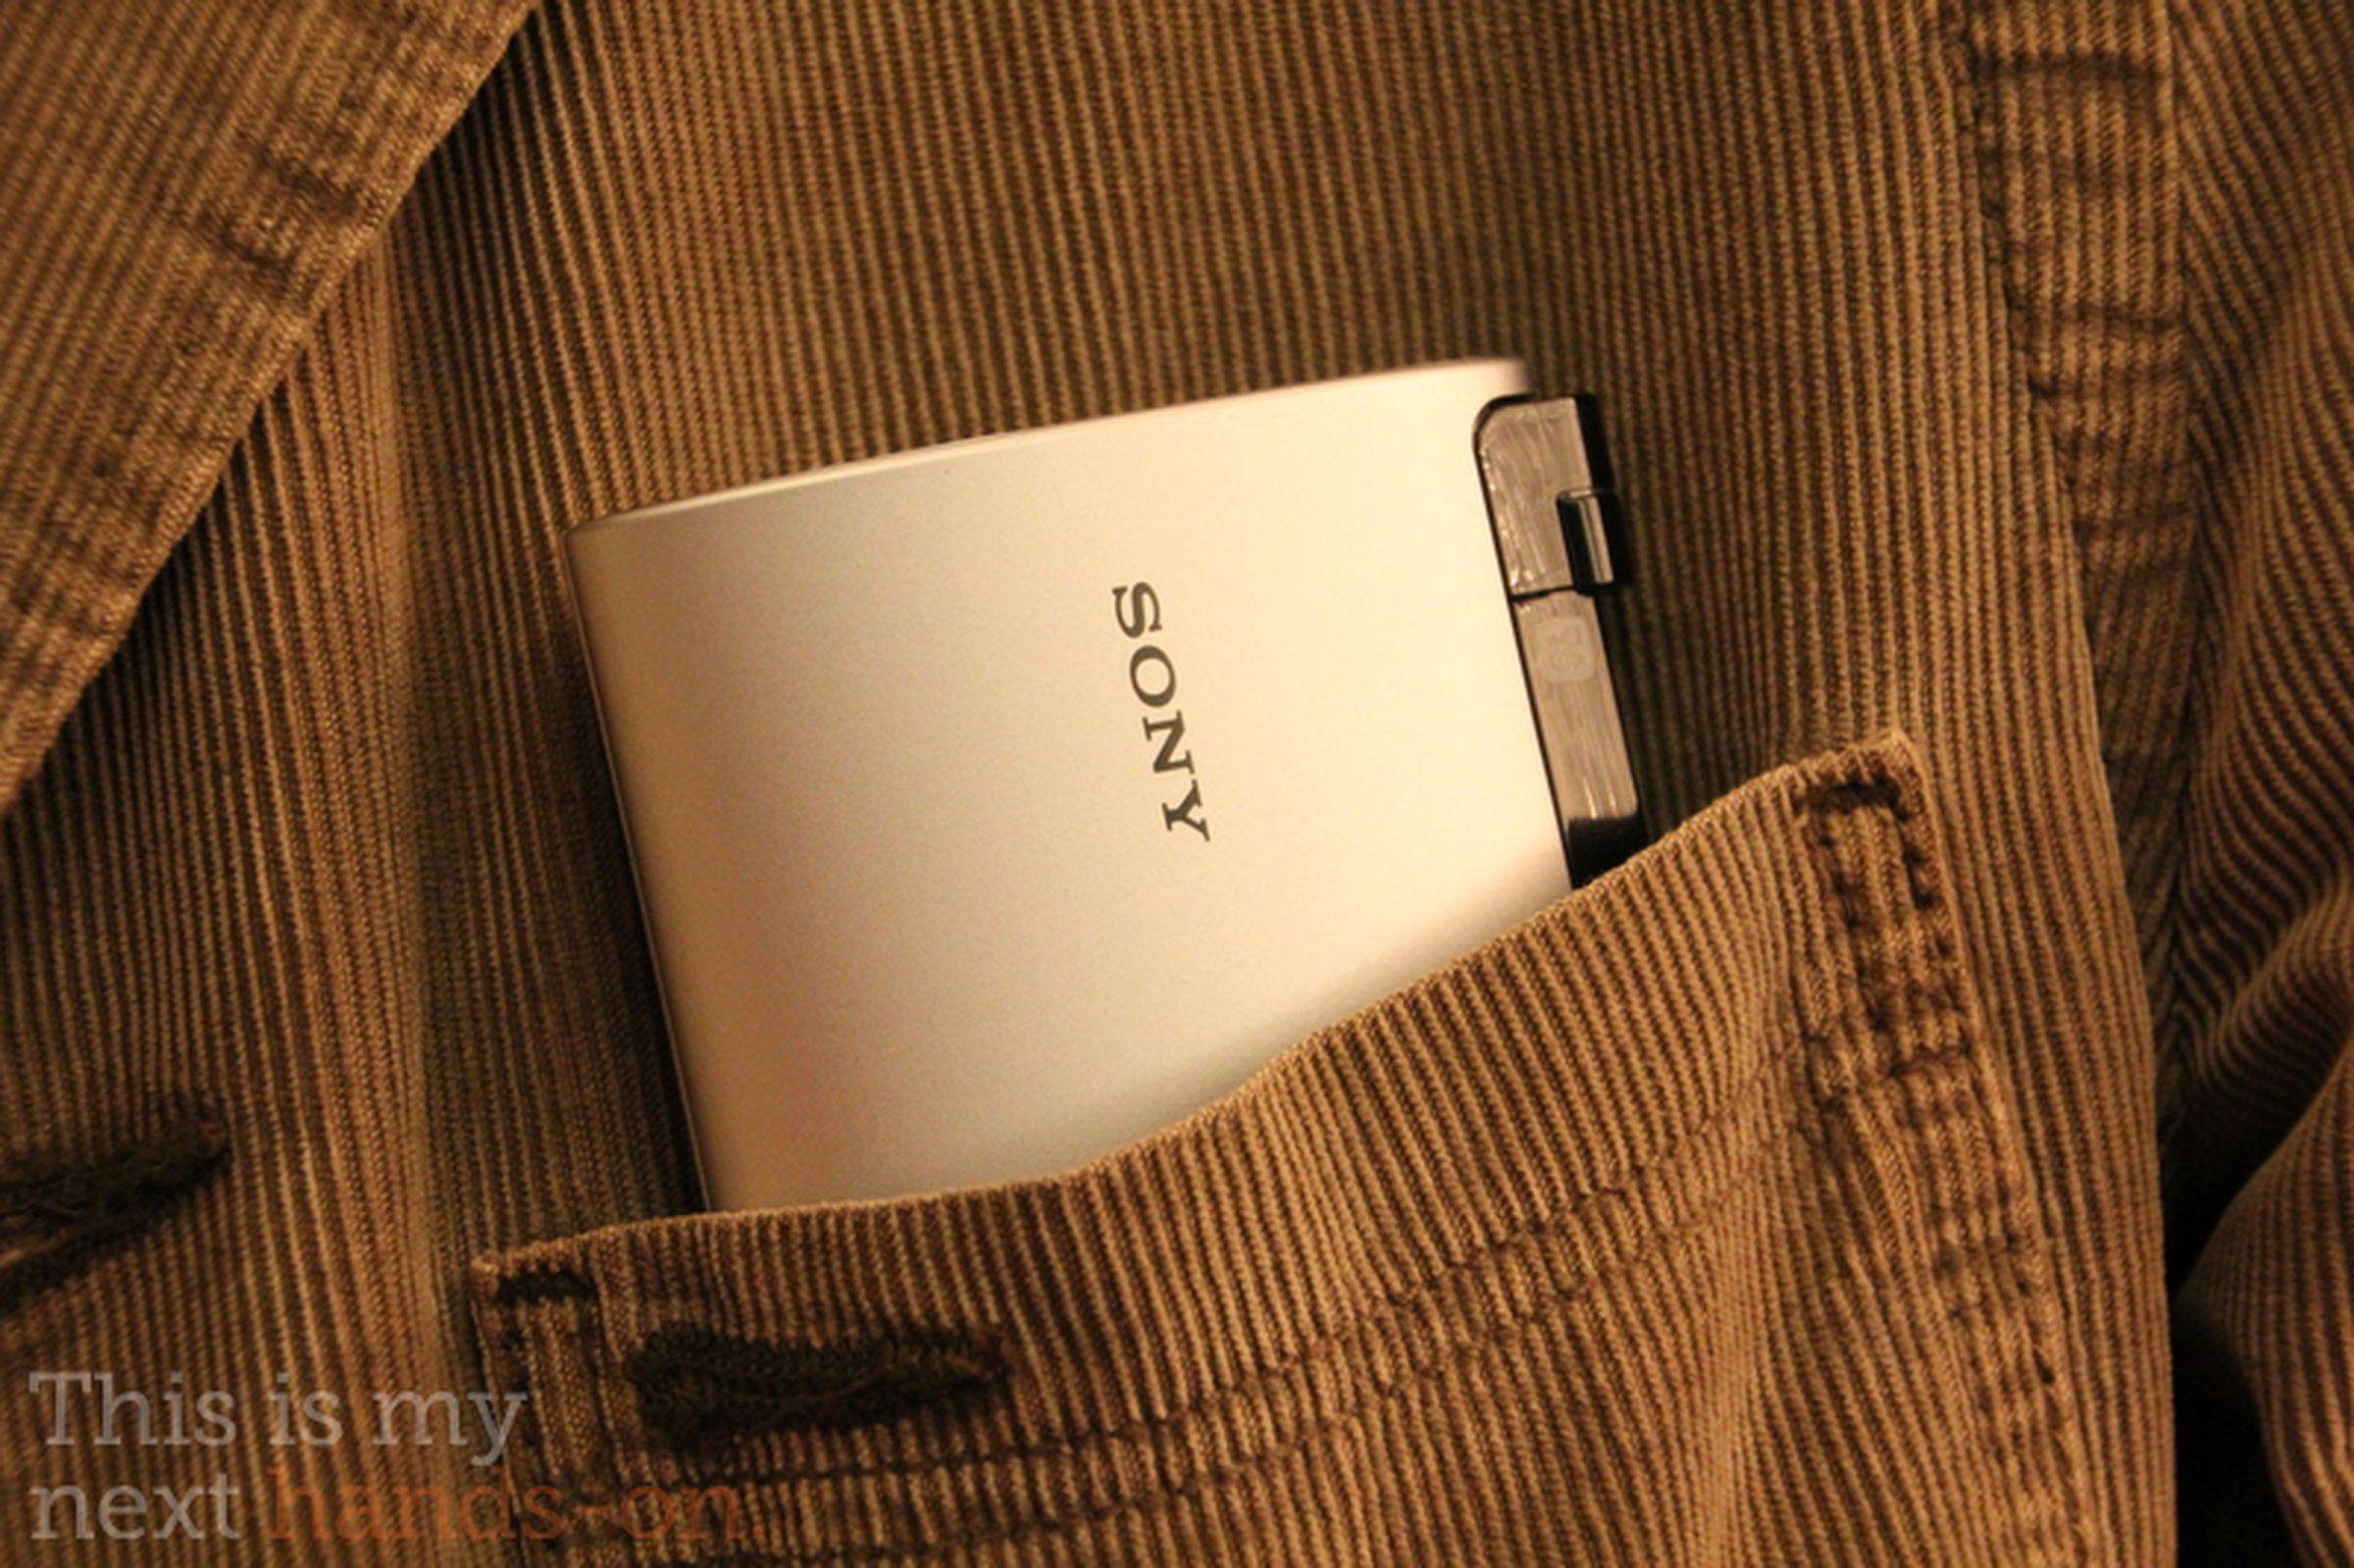 Sony S1 and S2 tablet hands-on pictures